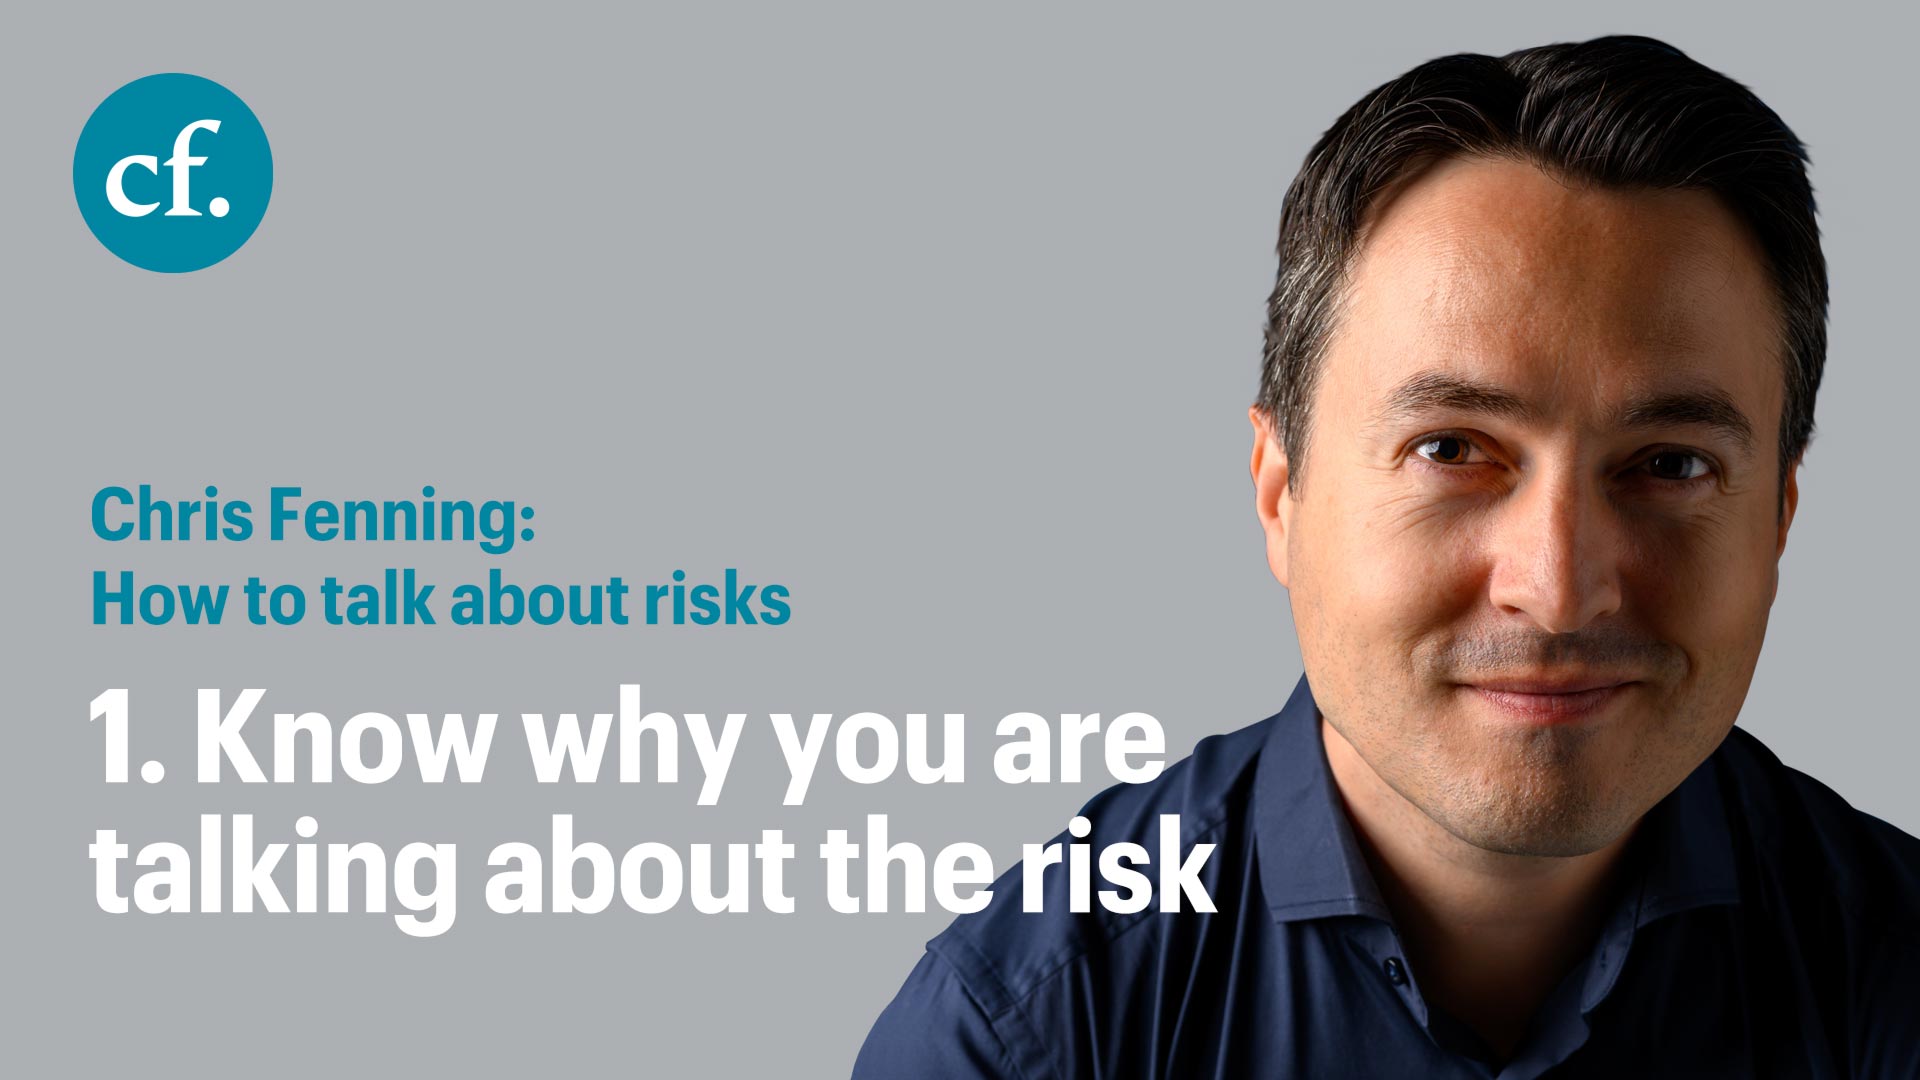 How to talk about risks video with Chris Fenning